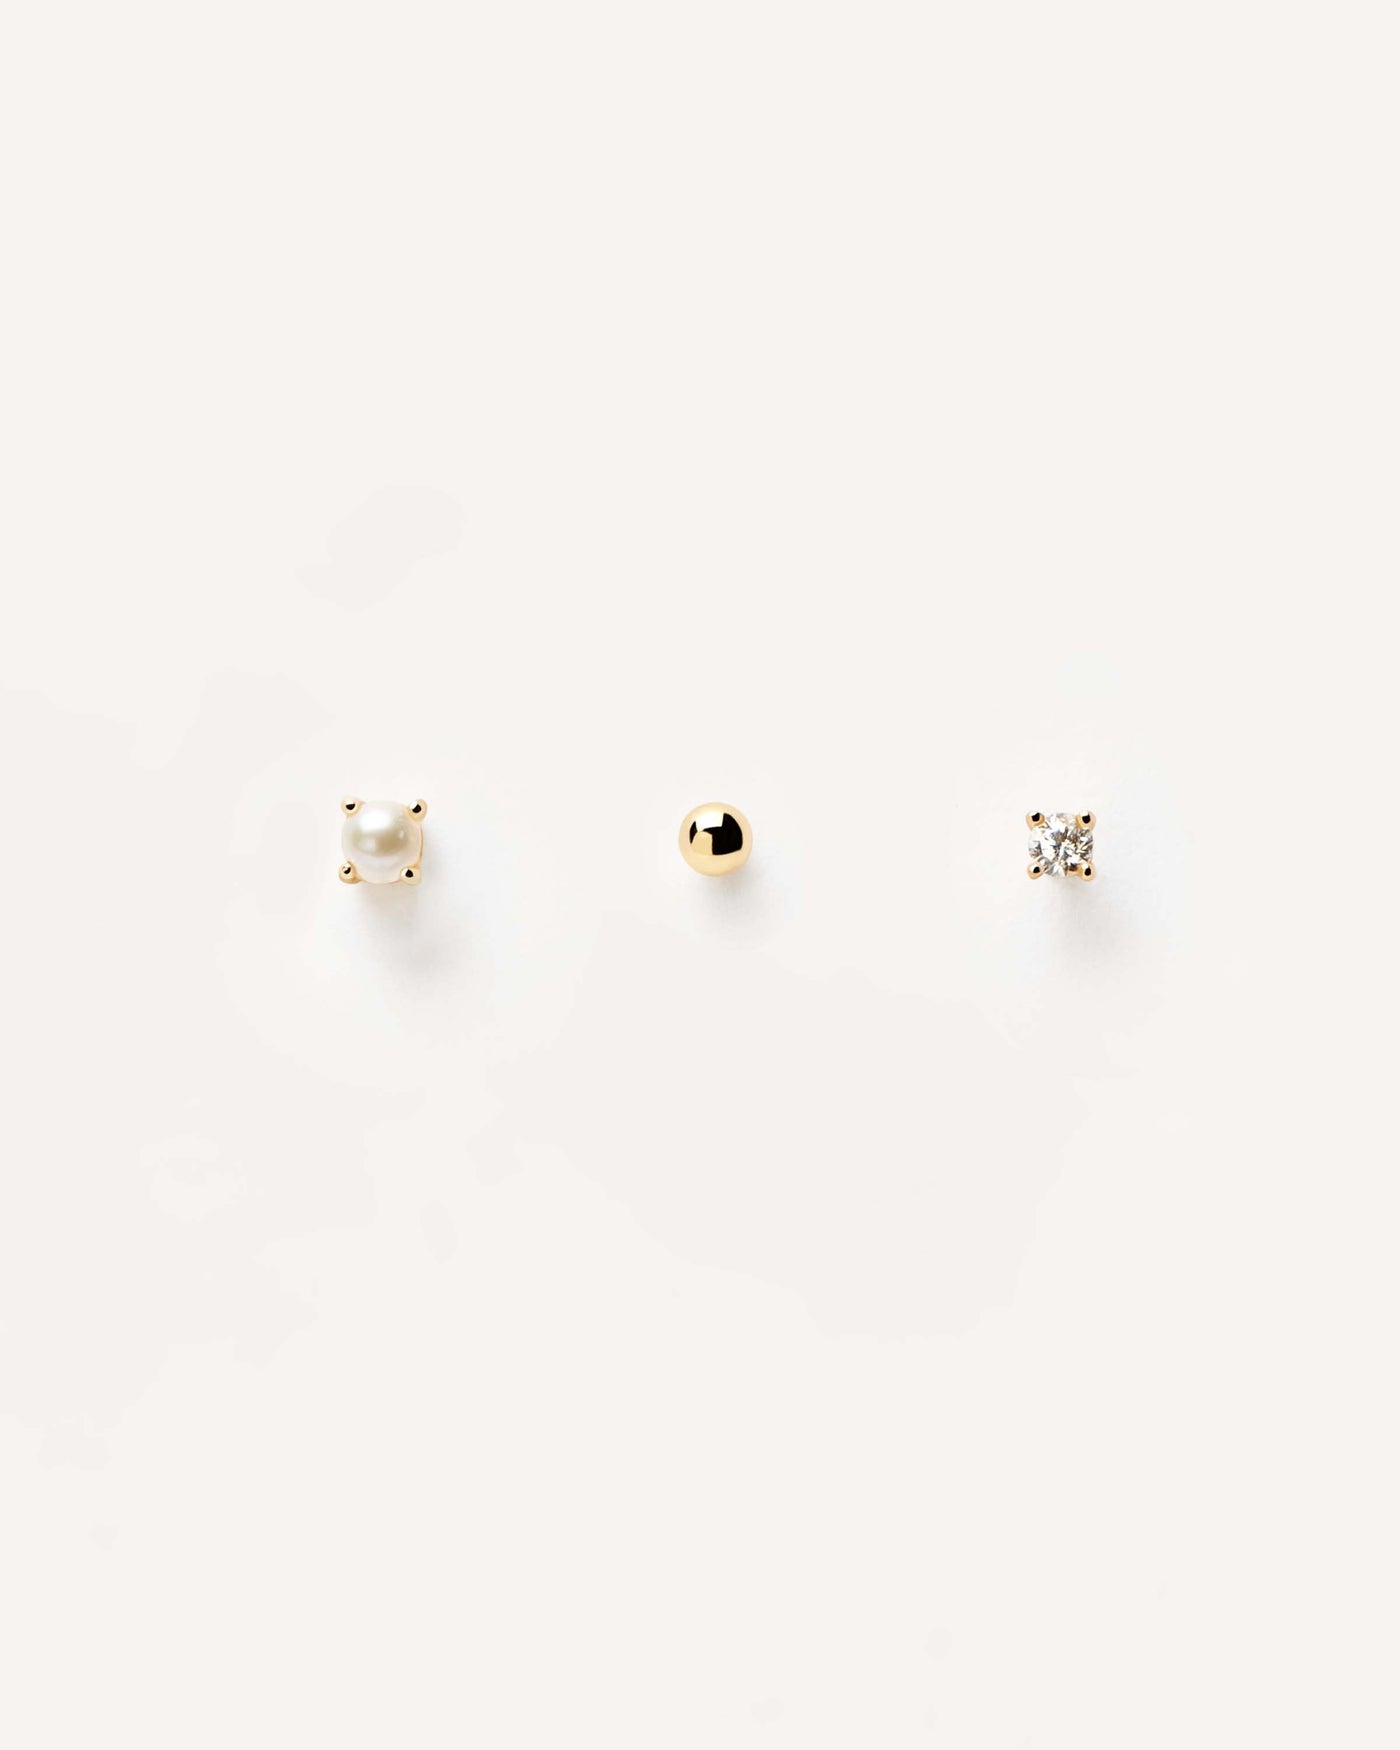 Amazon.com: Ufist Gold Earrings Sets Multiple Piercing, Dainty Gold Stud  Earrings for Women Girls Hypoallergenic CZ Huggies Earrings Sets Gold  Jewelry for Gifts: Clothing, Shoes & Jewelry